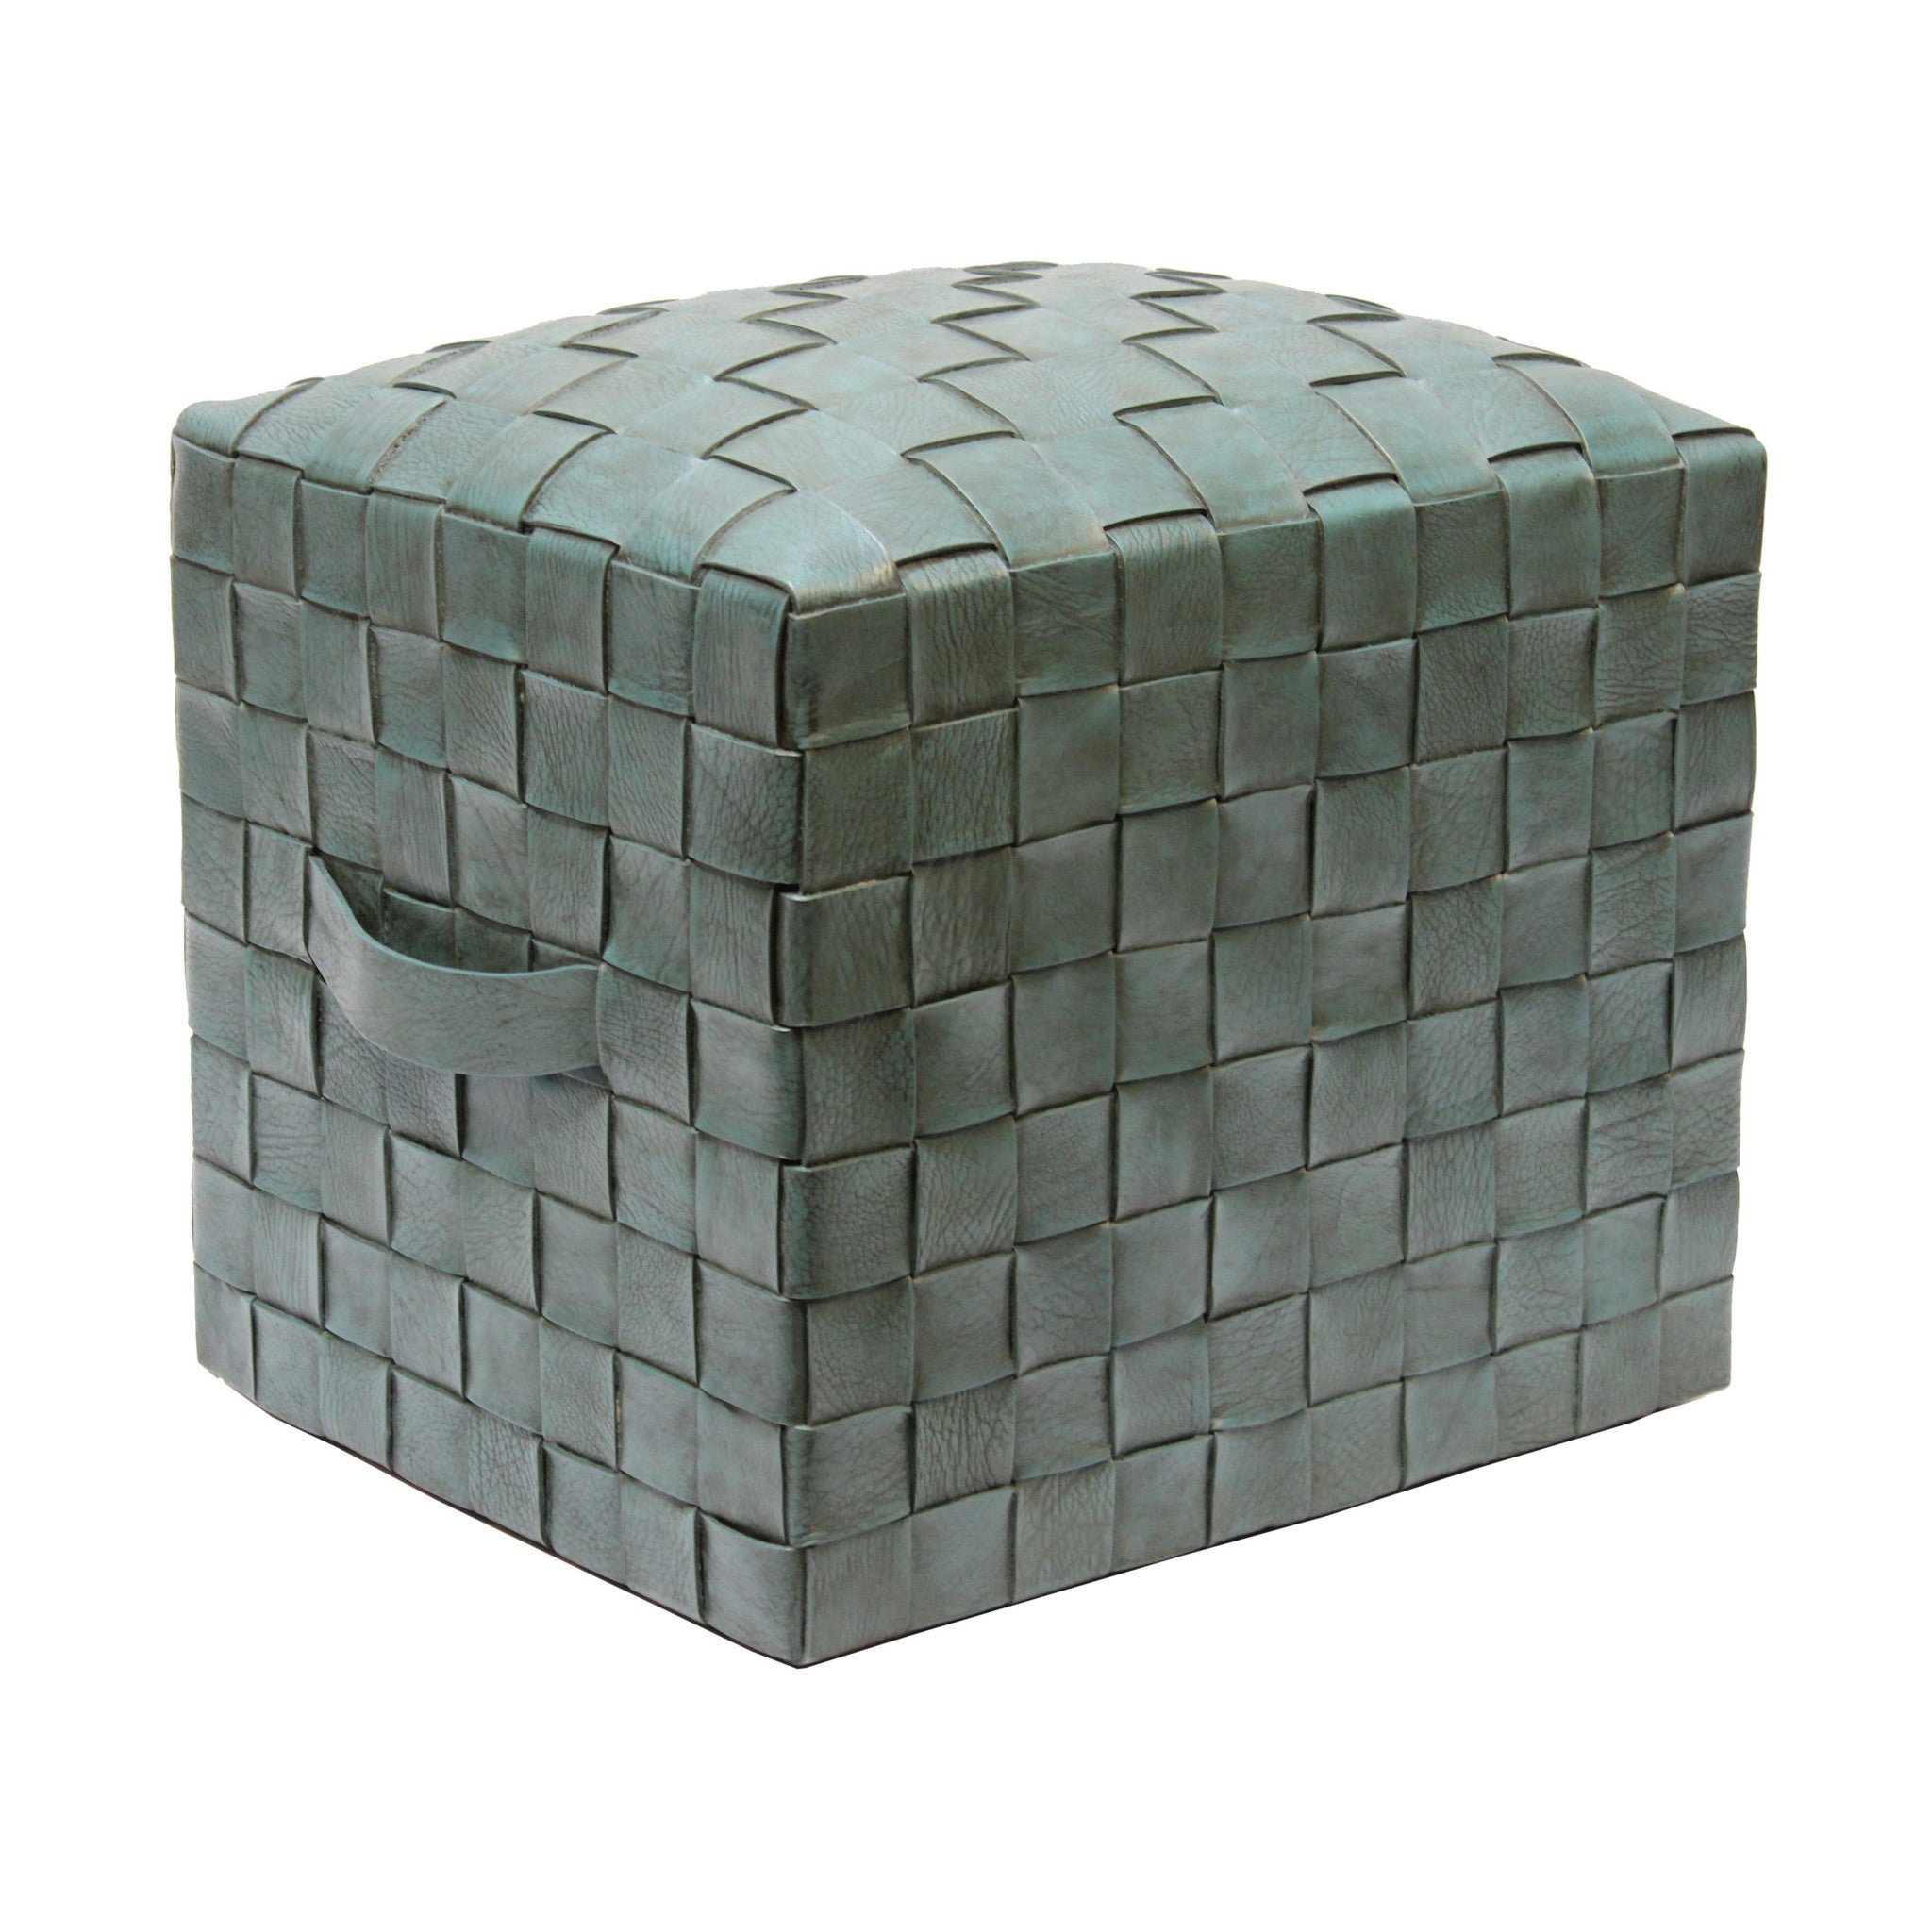 Brooklin Woven Leather Pouf, Turquoise